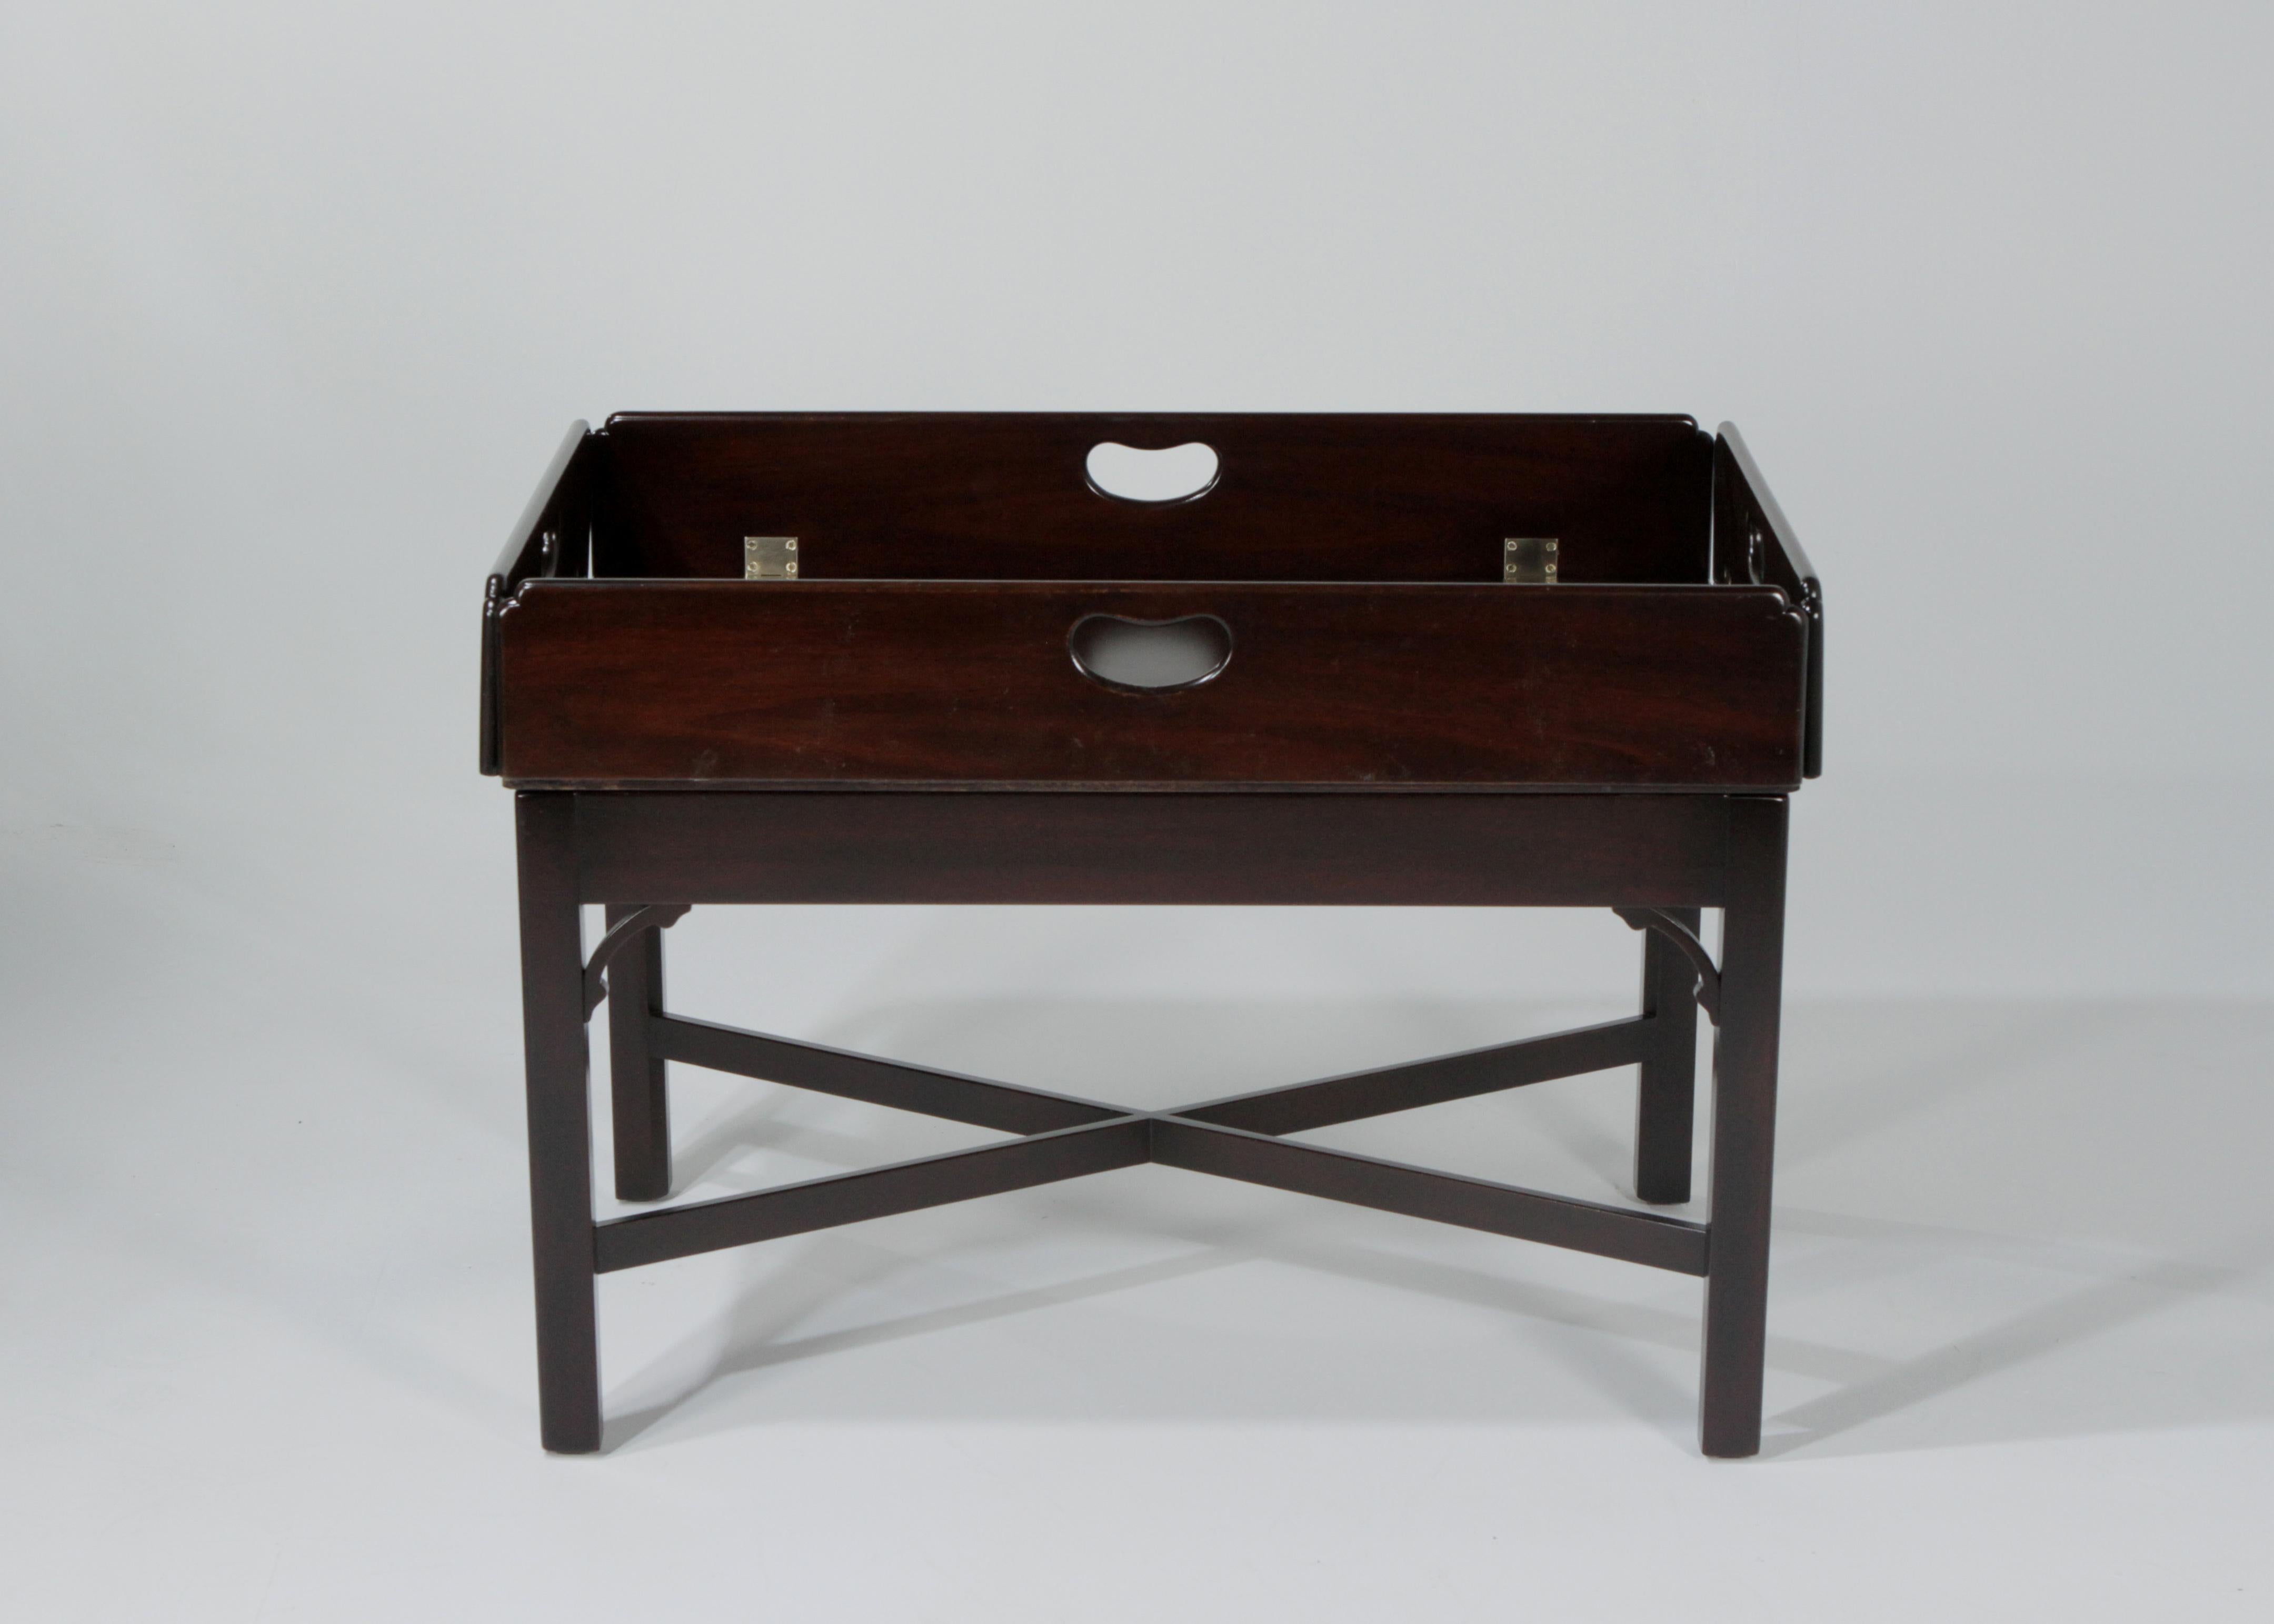 A very nice Kittinger mahogany drop-leaf butler tray table. This table is made of solid mahogany with a mahogany veneered top with quartered mahogany banding, pierced headholes, corner brackets and crossed stretchers. With the drop up the table is